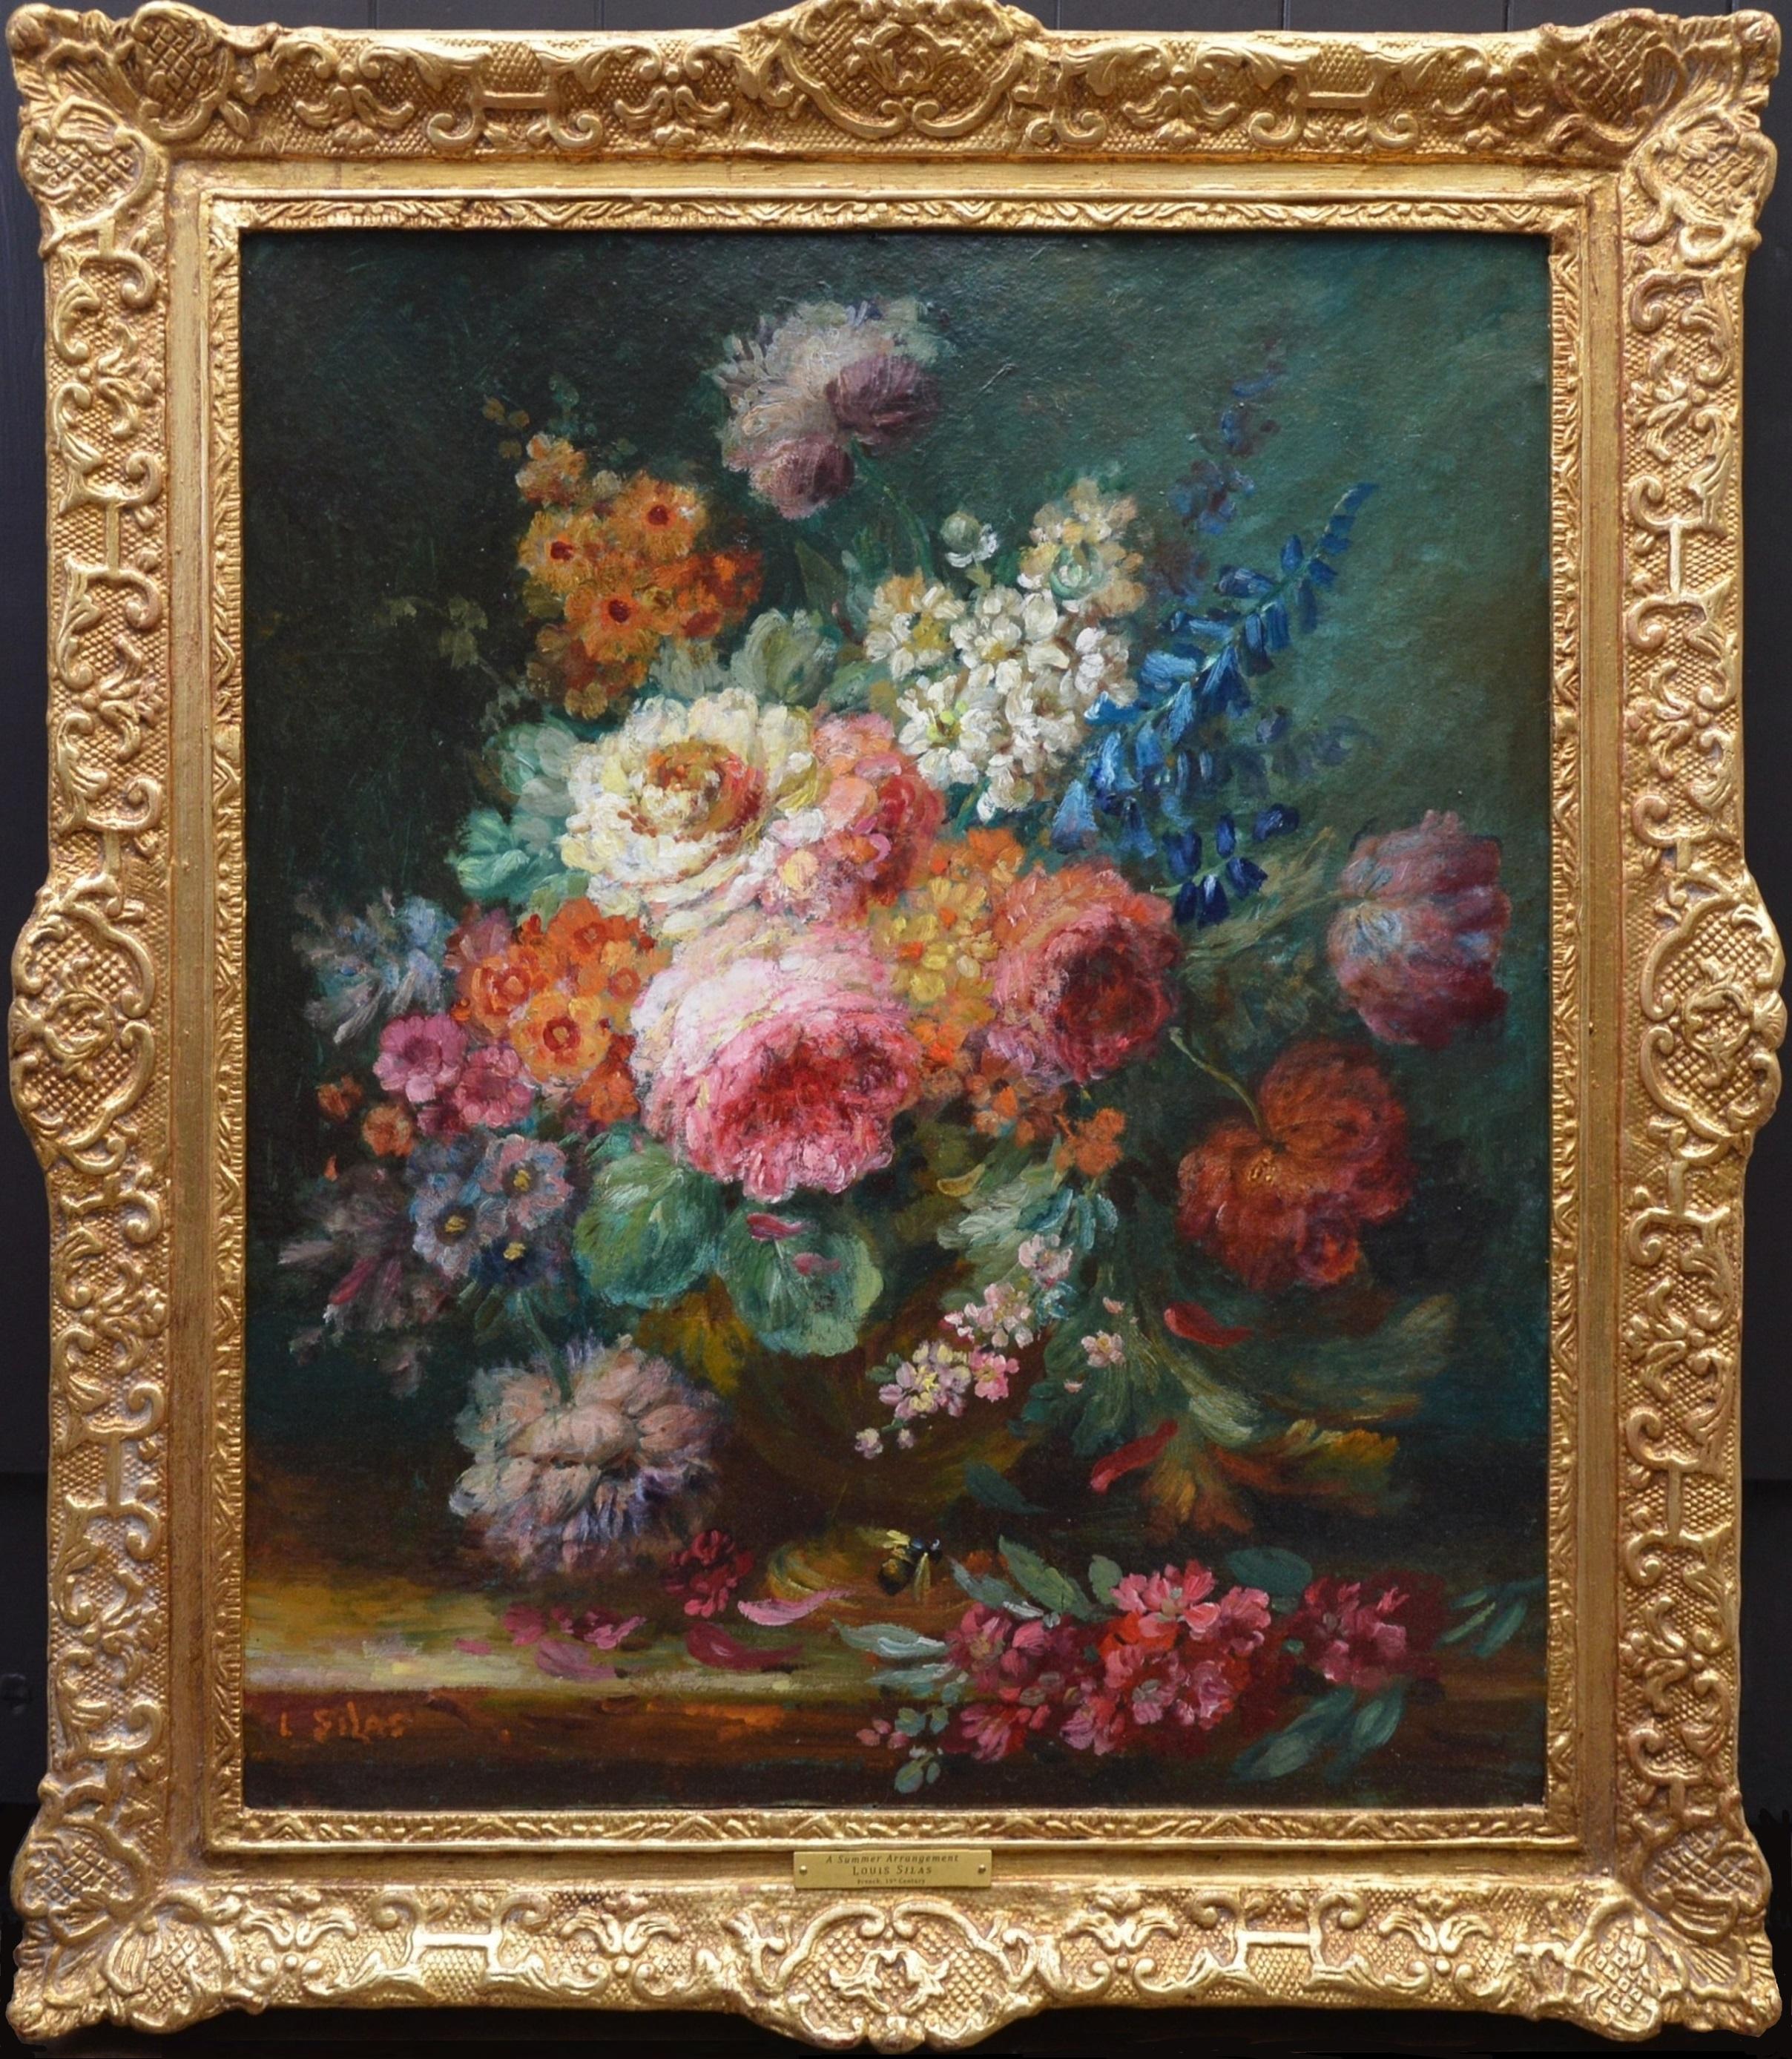 Louis Silas Animal Painting - A Summer Arrangement - 19th Century Floral Still Life Oil Painting 